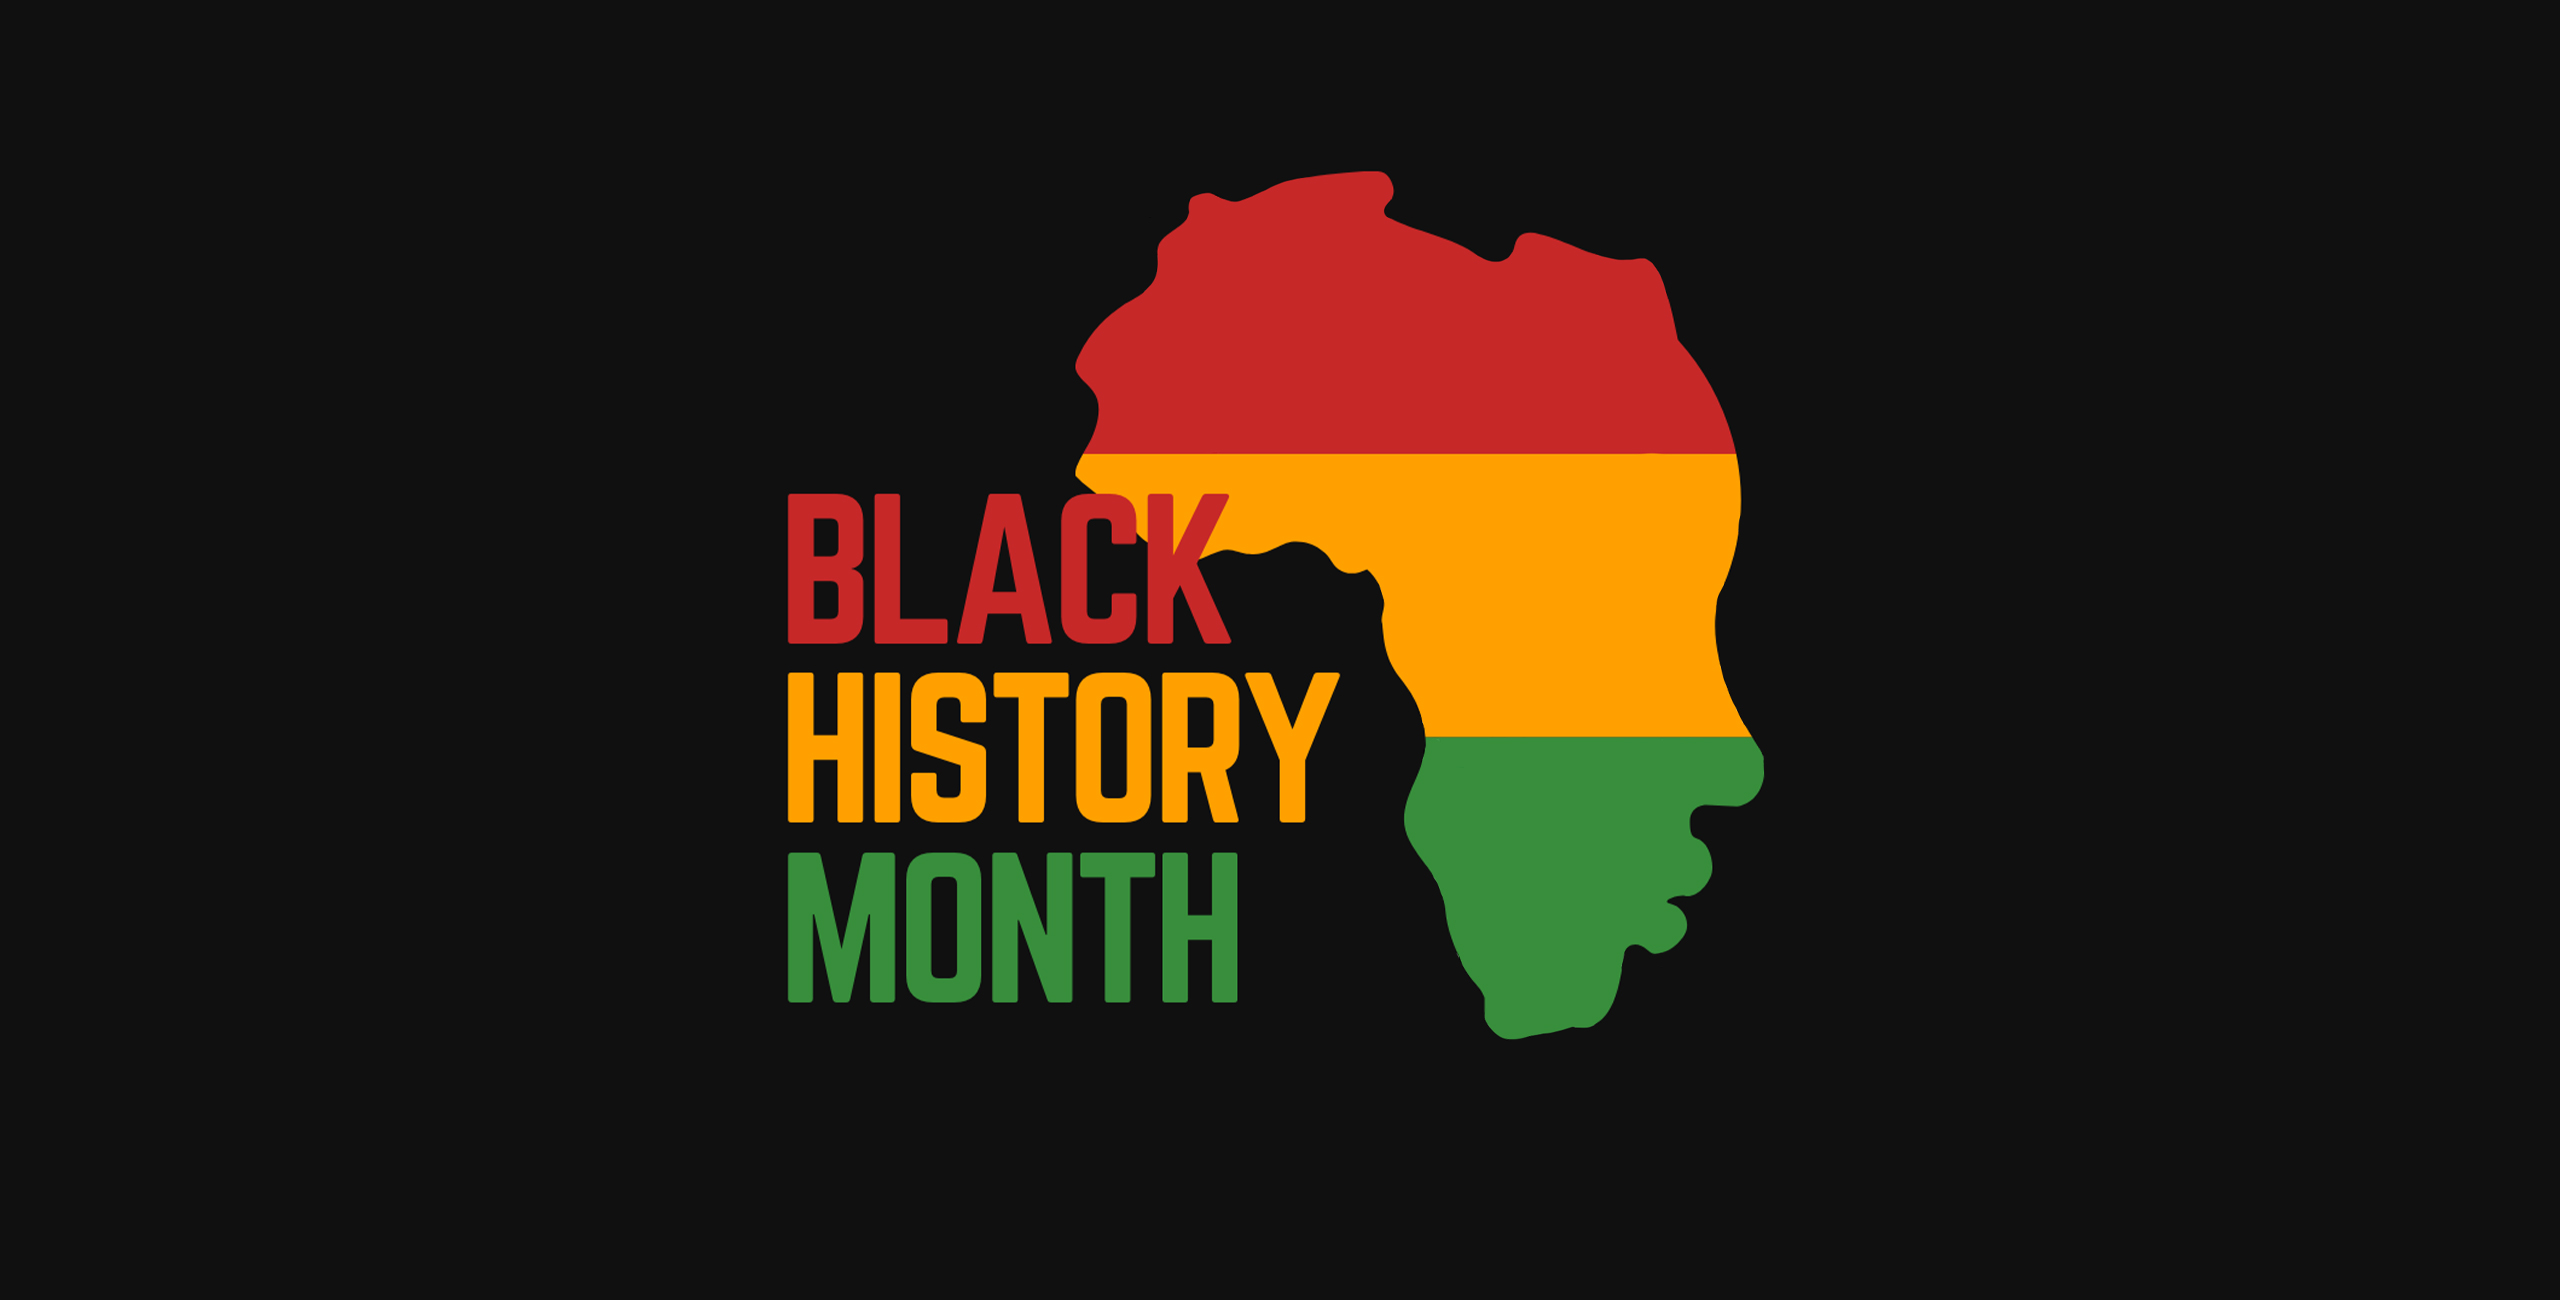 Map of Africa in red, yellow, and green on black background with words Black History Month